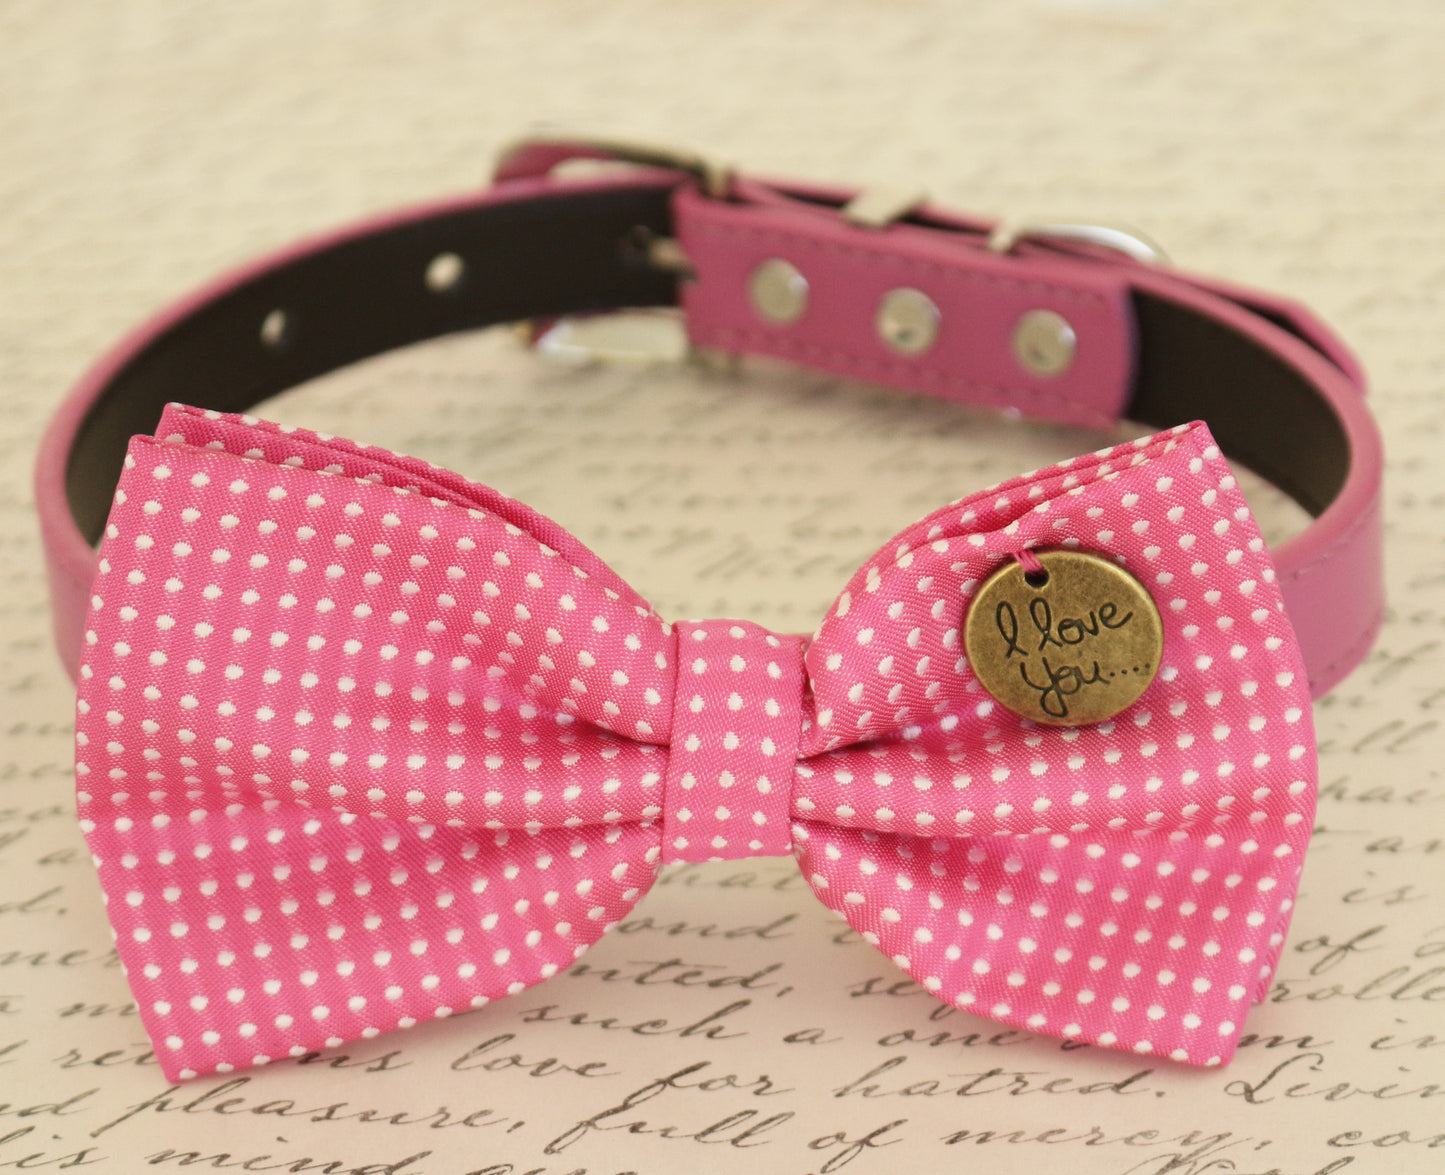 Hot Pink Dog Bow tie attached to collar, Dog gift, Pet accessory, Polka dots , Wedding dog collar